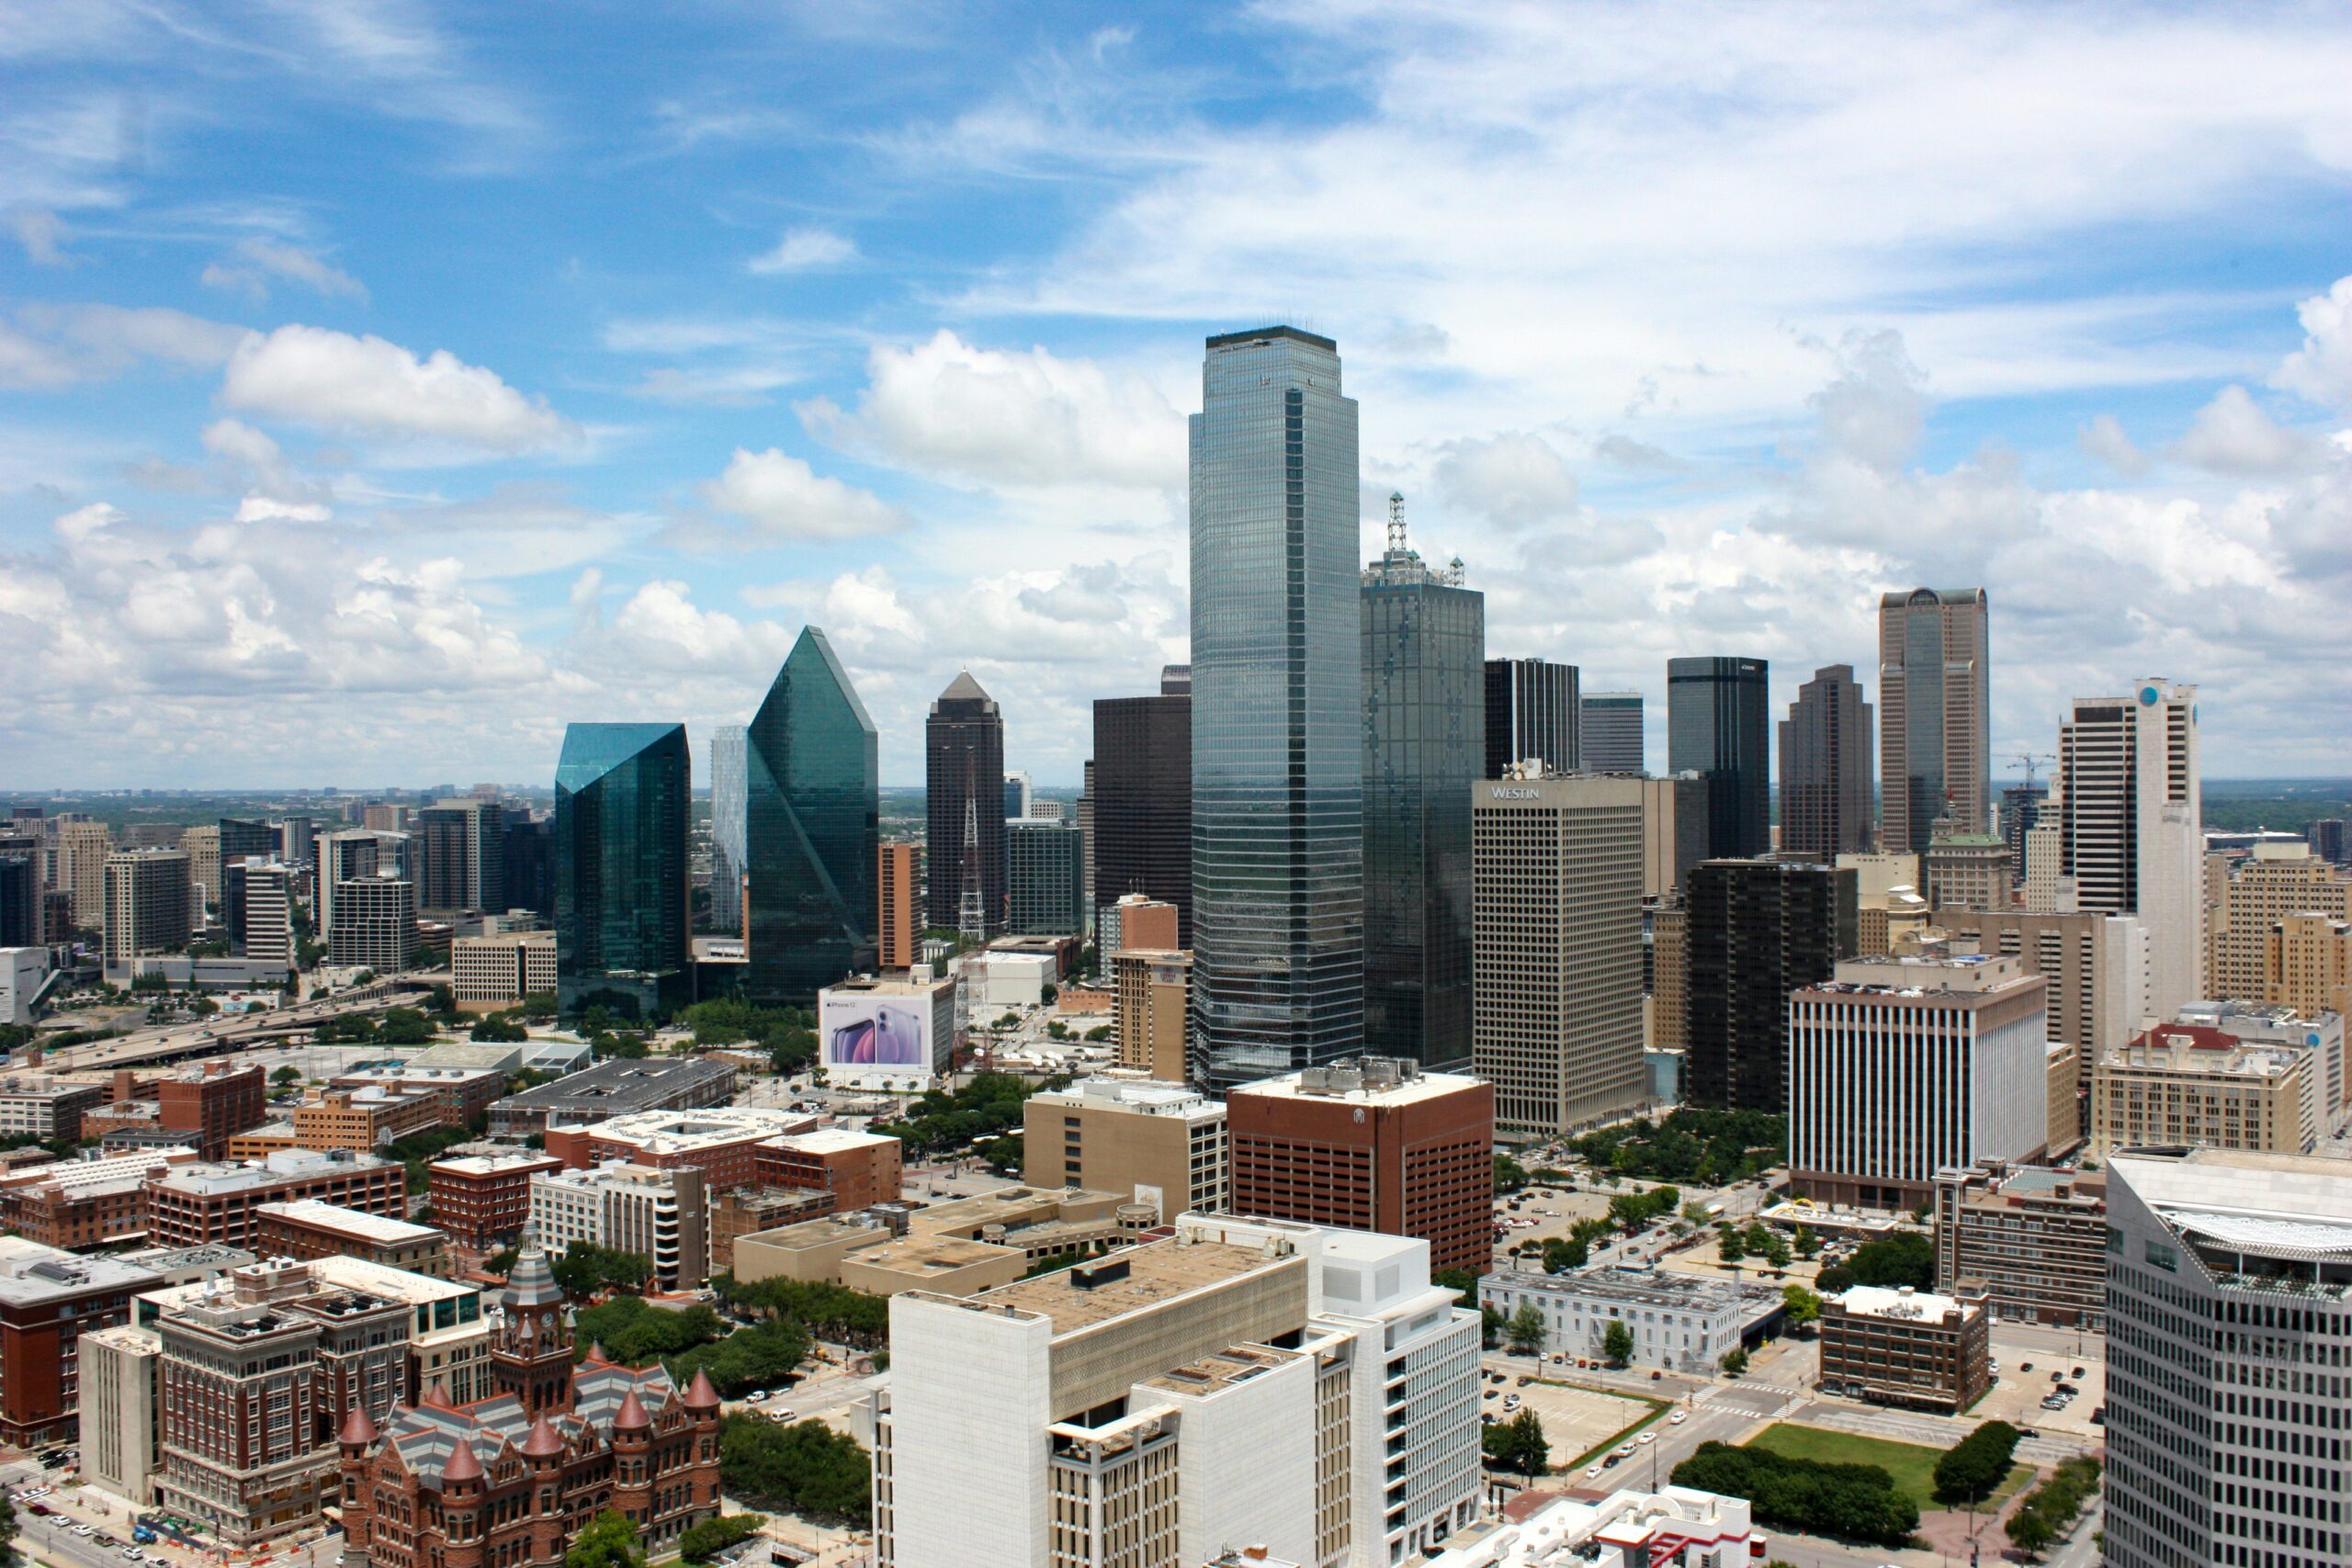 Dallas is one of the most affordable gay friendly cities in the U.S. in the state of Texas. Pictured: A skyline view of Dallas